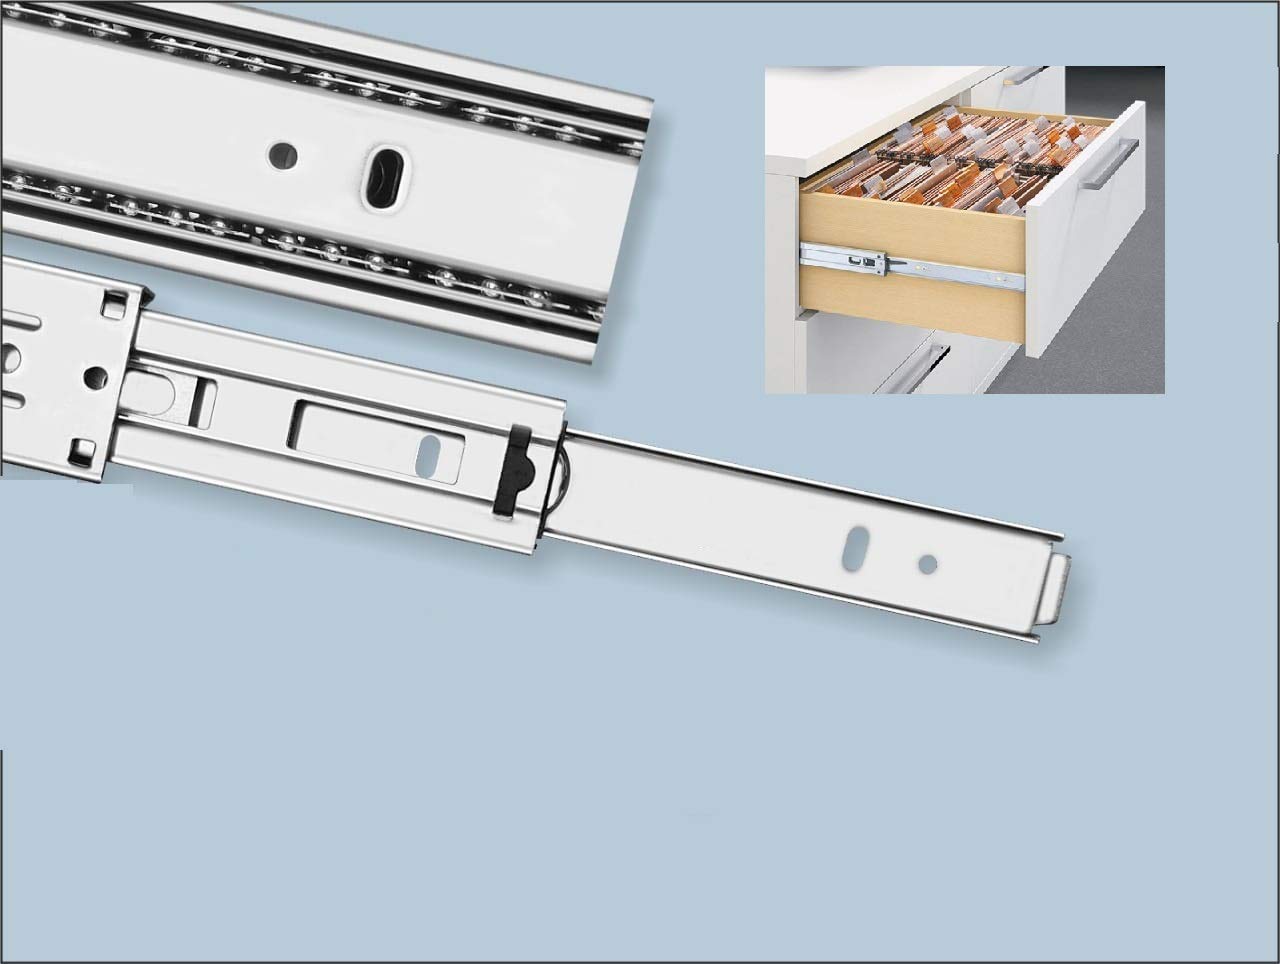 Plantex Stainless Steel 5 Ball Bearing Telescopic Slide/Drawer Channel -12 Inches (Silver)